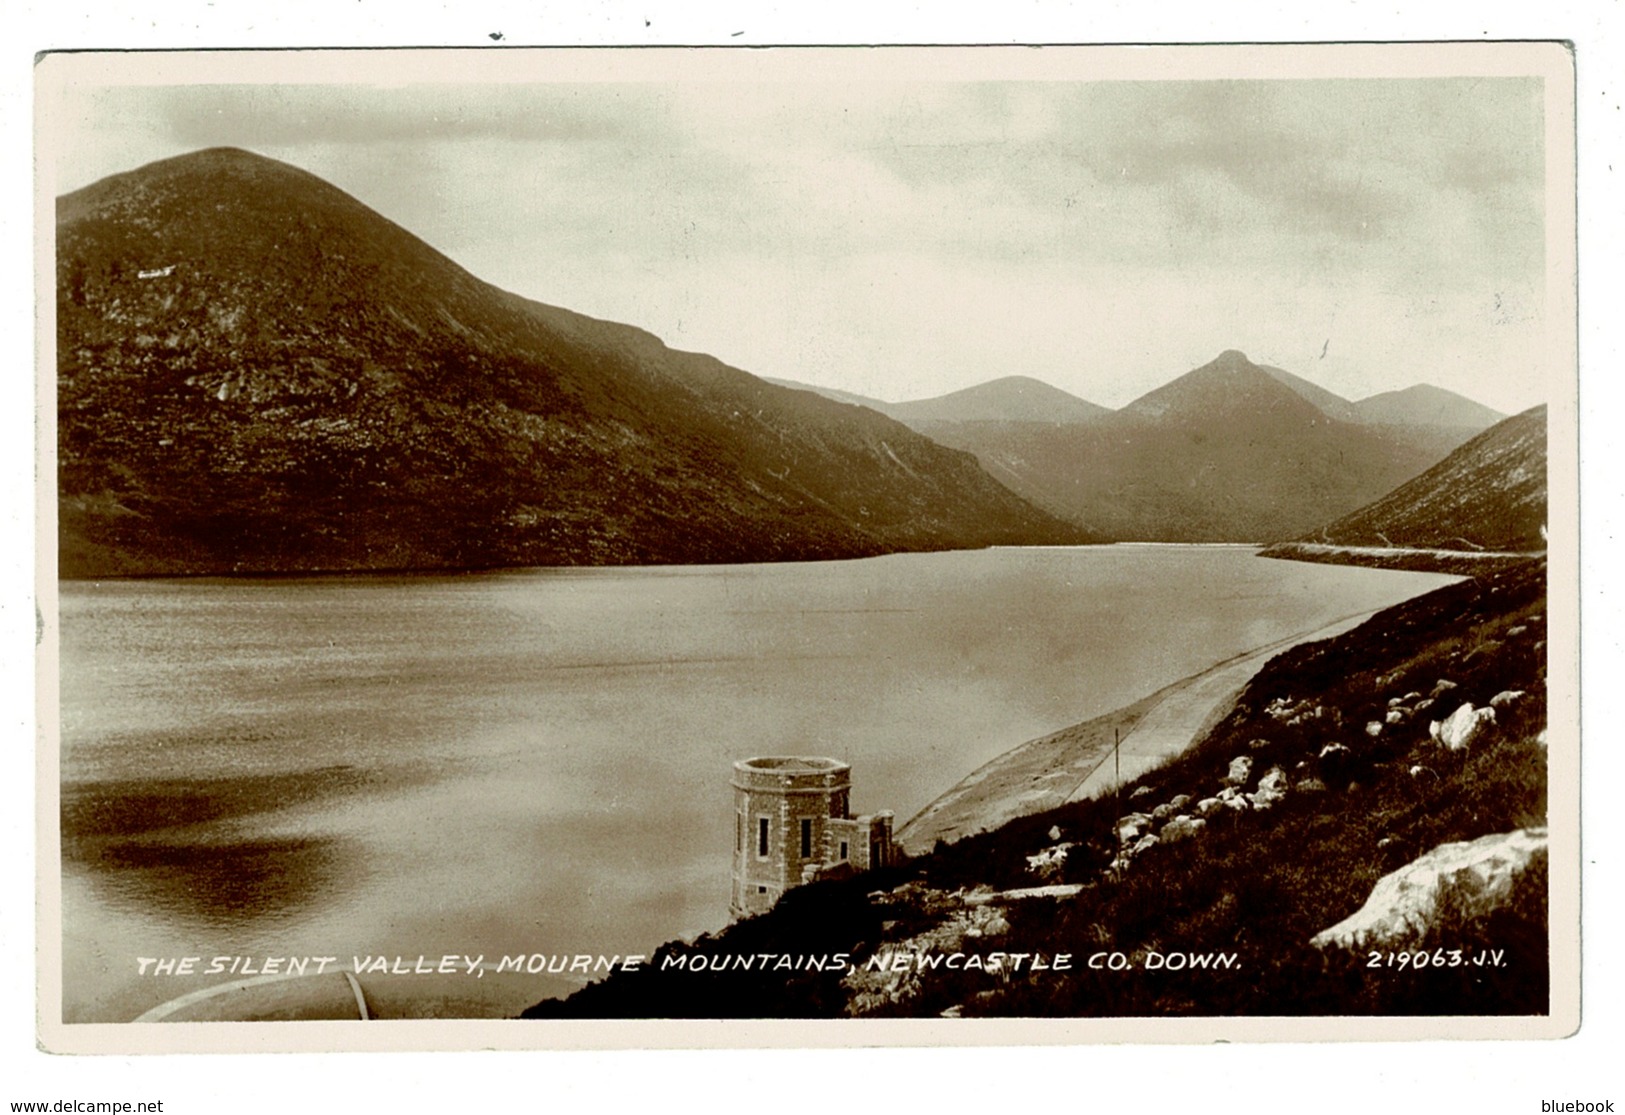 Ref 1349 - 1934 Real Photo Postcard - The Silent Valley Mourne Mountains Newcastle - County Down Ireland - Down